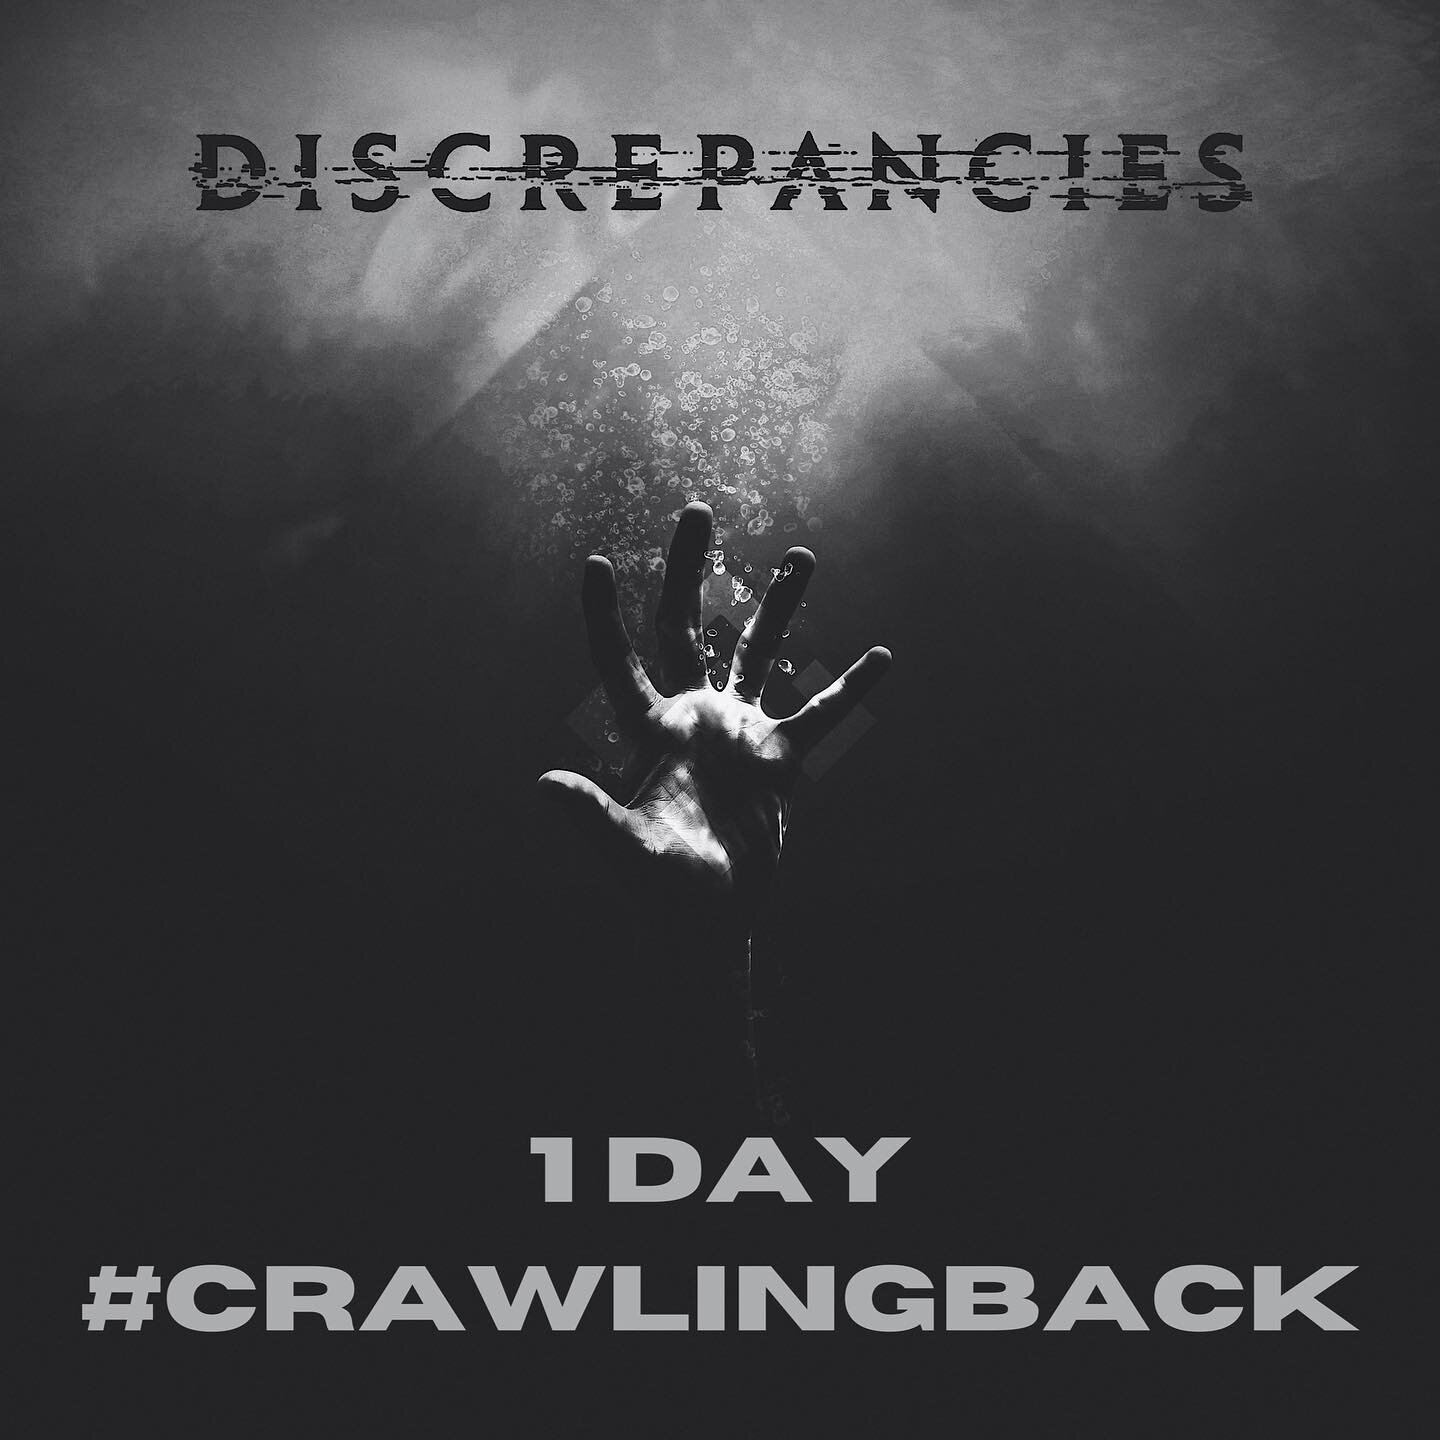 &bull;
T O M O R R O W 

&ldquo;Crawling Back&rdquo; will drop everywhere at MIDNIGHT!! 

Let us know if you&rsquo;re staying up to hear it👇

𝙋𝙍𝙀-𝙎𝘼𝙑𝙀 &amp; 𝘼𝘿𝘿 𝙄𝙏 𝙏𝙊 𝙔𝙊𝙐𝙍 𝙋𝙇𝘼𝙔𝙇𝙄𝙎𝙏 𝙉𝙊𝙒!! 𝘓𝘐𝘕𝘒 𝘐𝘕 𝘉𝘐𝘖

#CRAWLINGBA